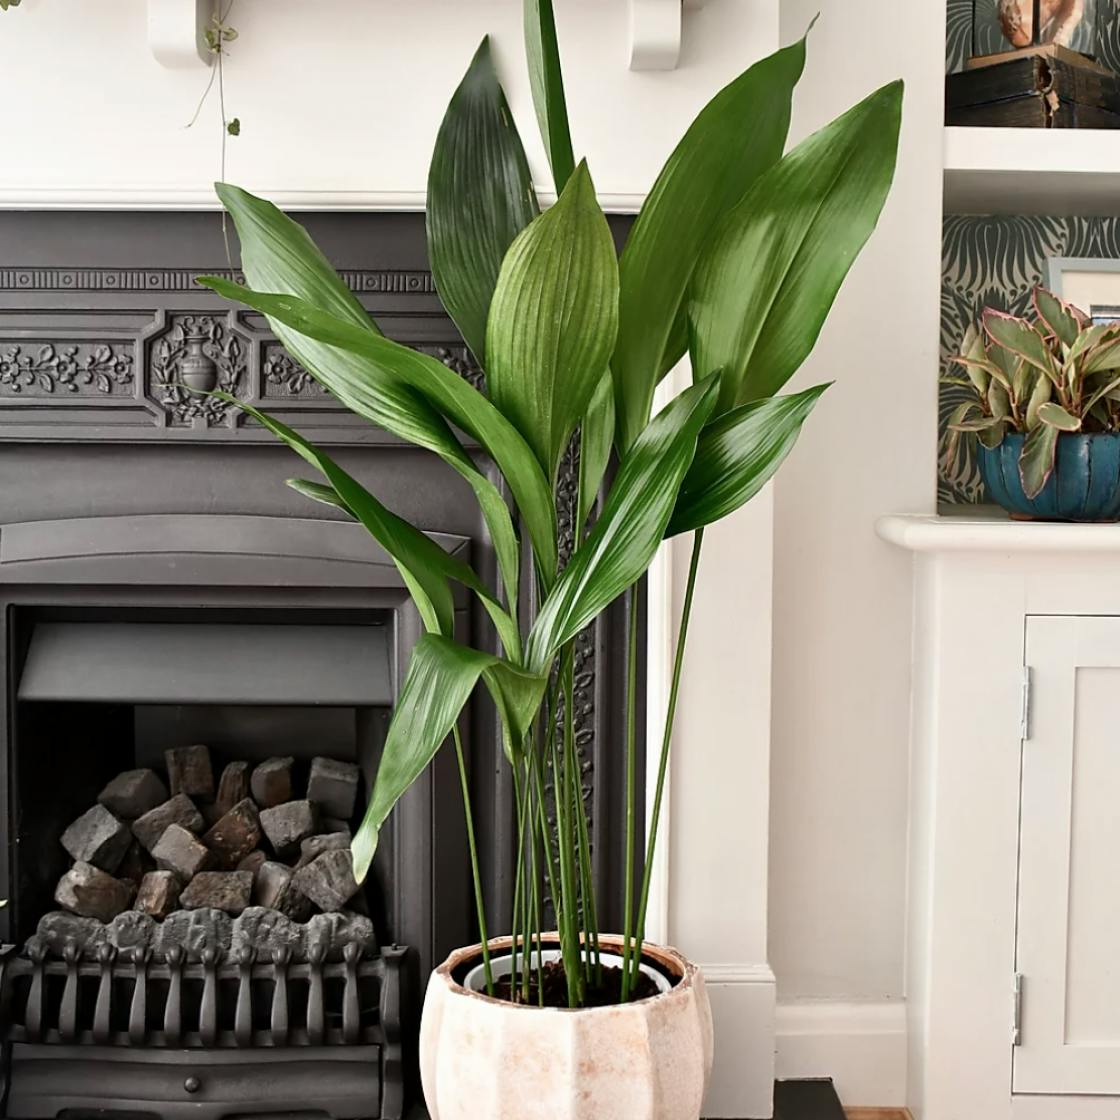 20 tall, statement plants to decorate your home and office